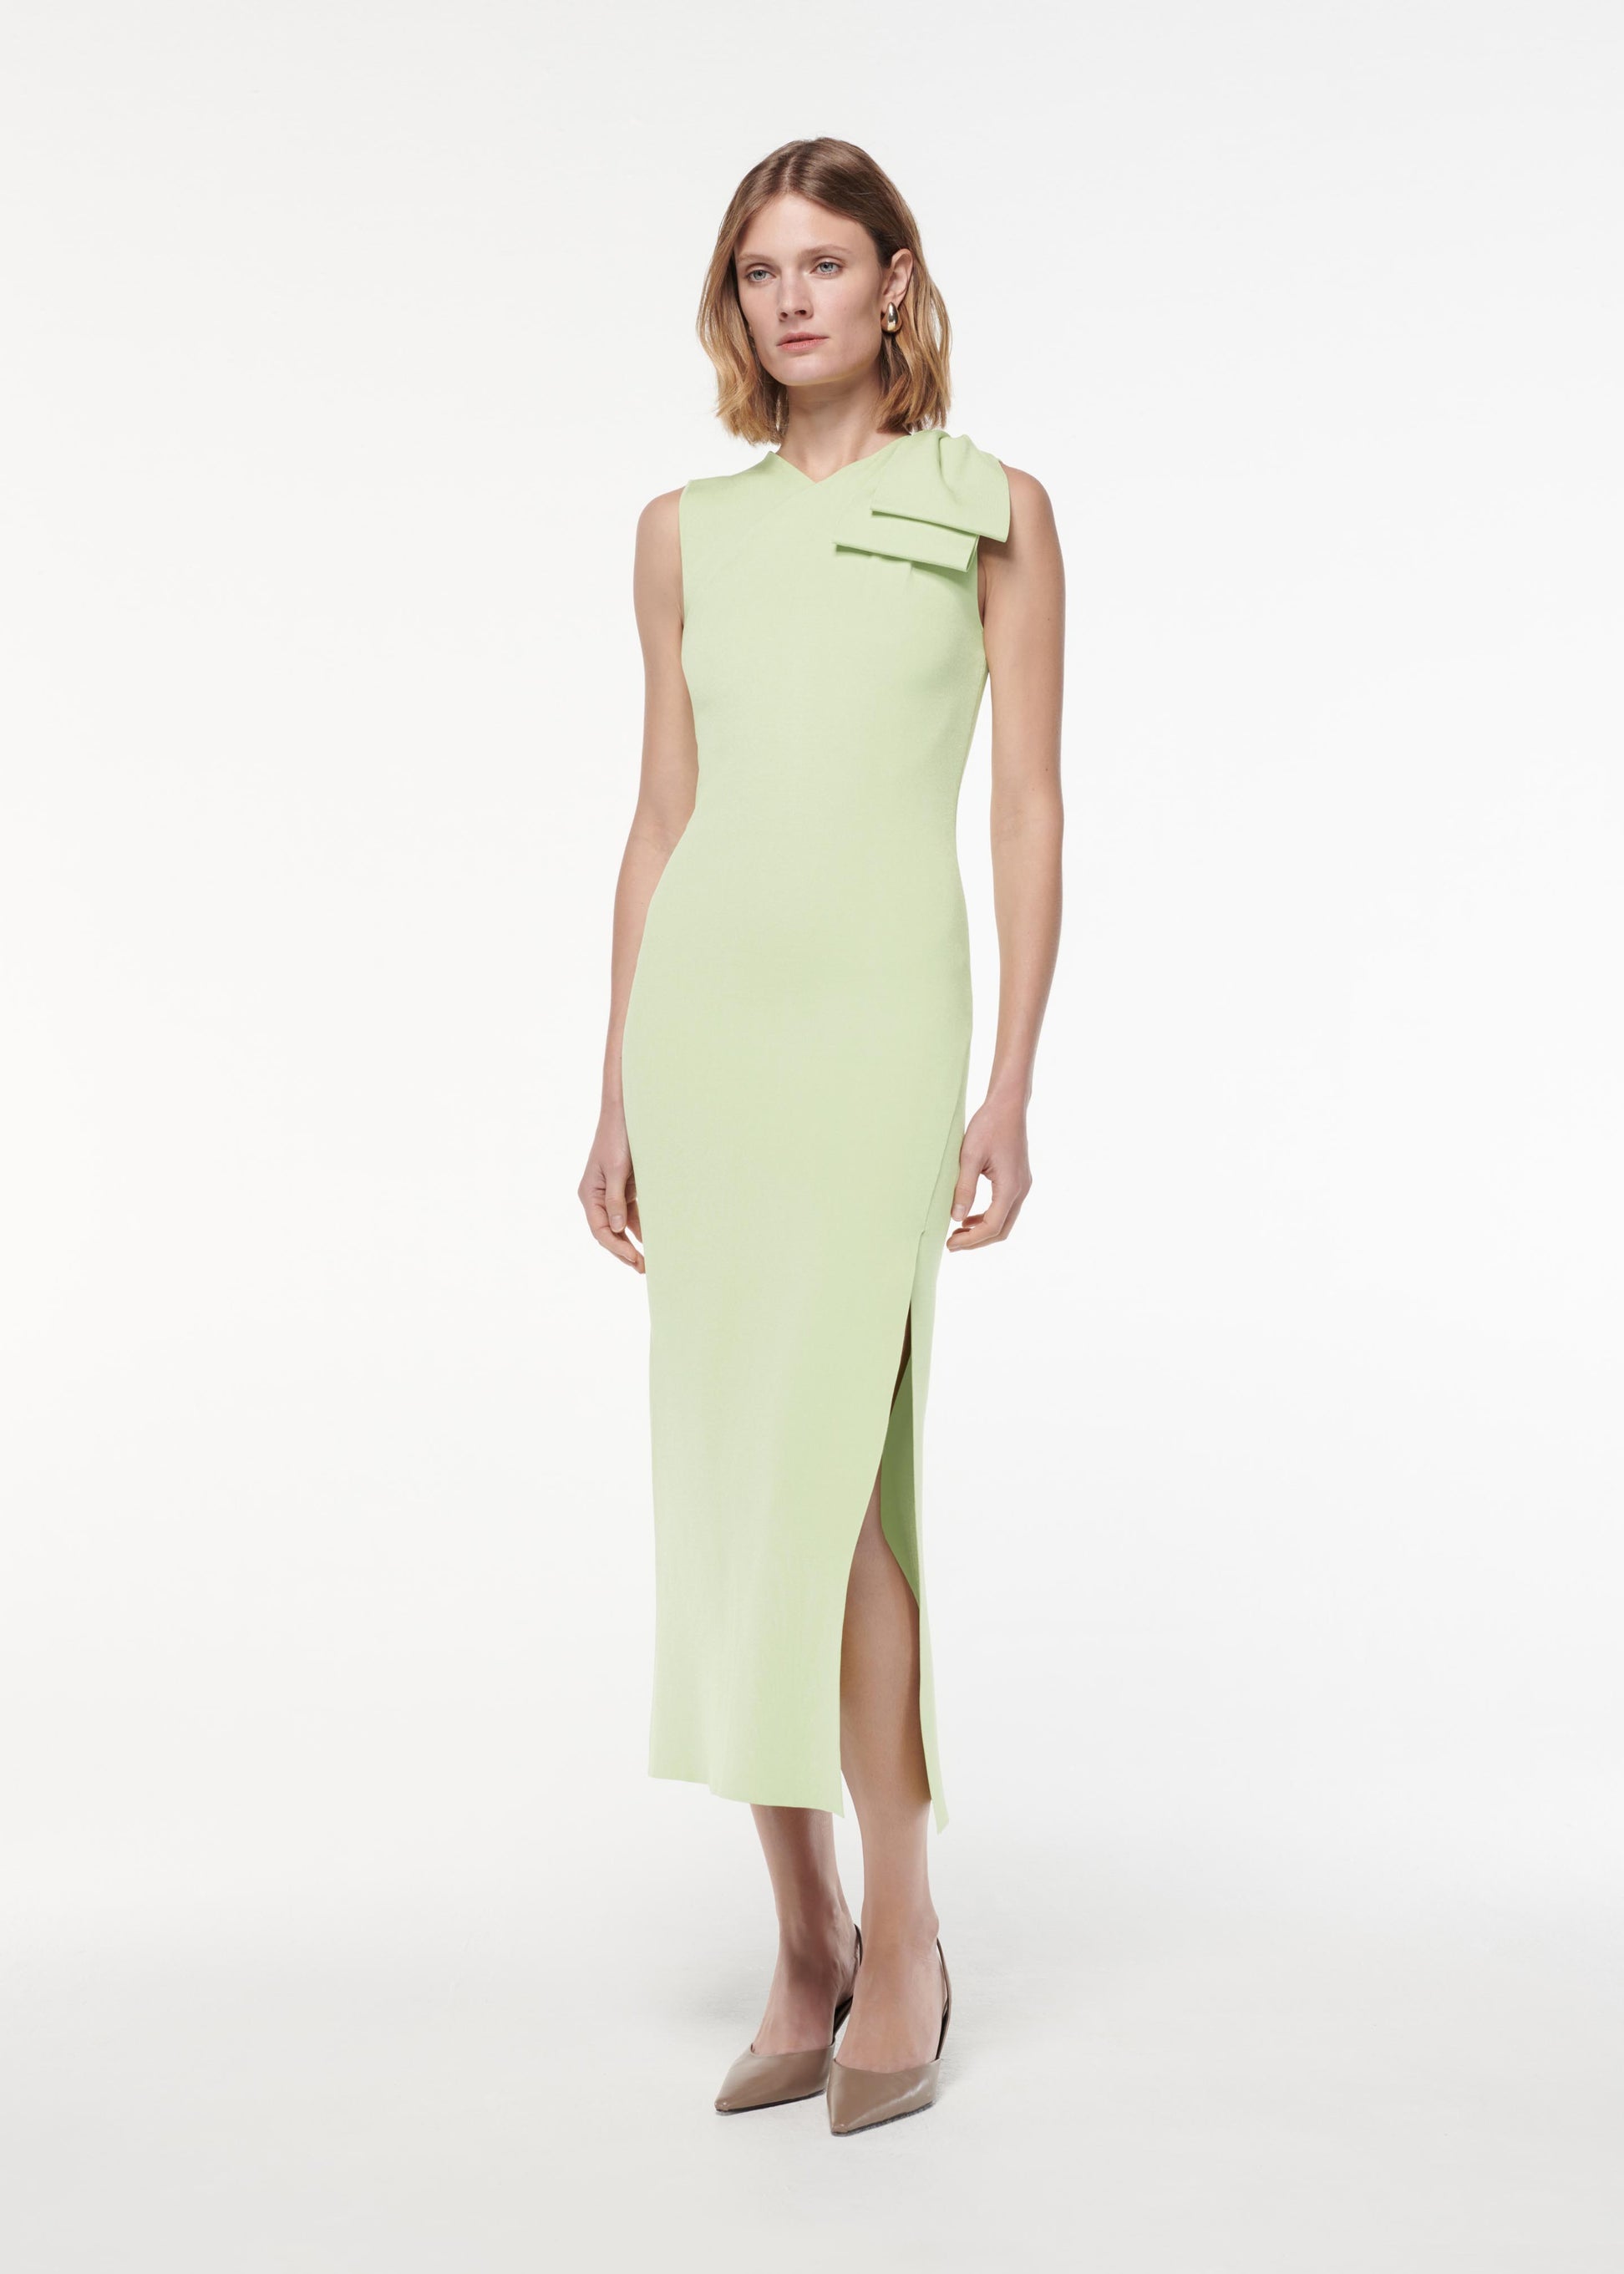 A photograph of a woman wearing a Flat Knit Bow Midi Dress in Green